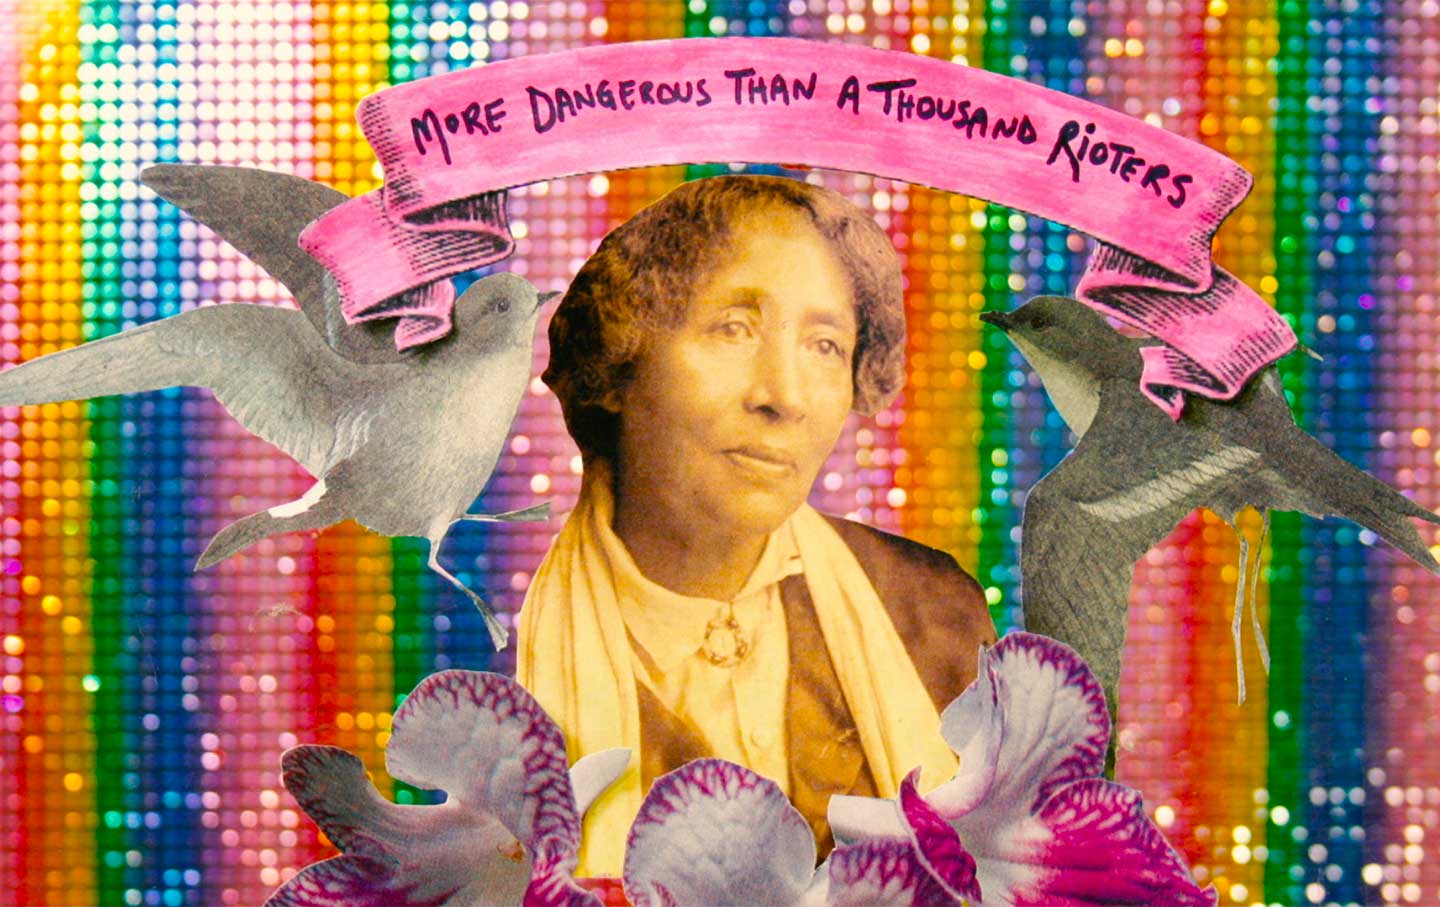 More Dangerous Than a Thousand Rioters: The Revolutionary Life of Lucy Parsons